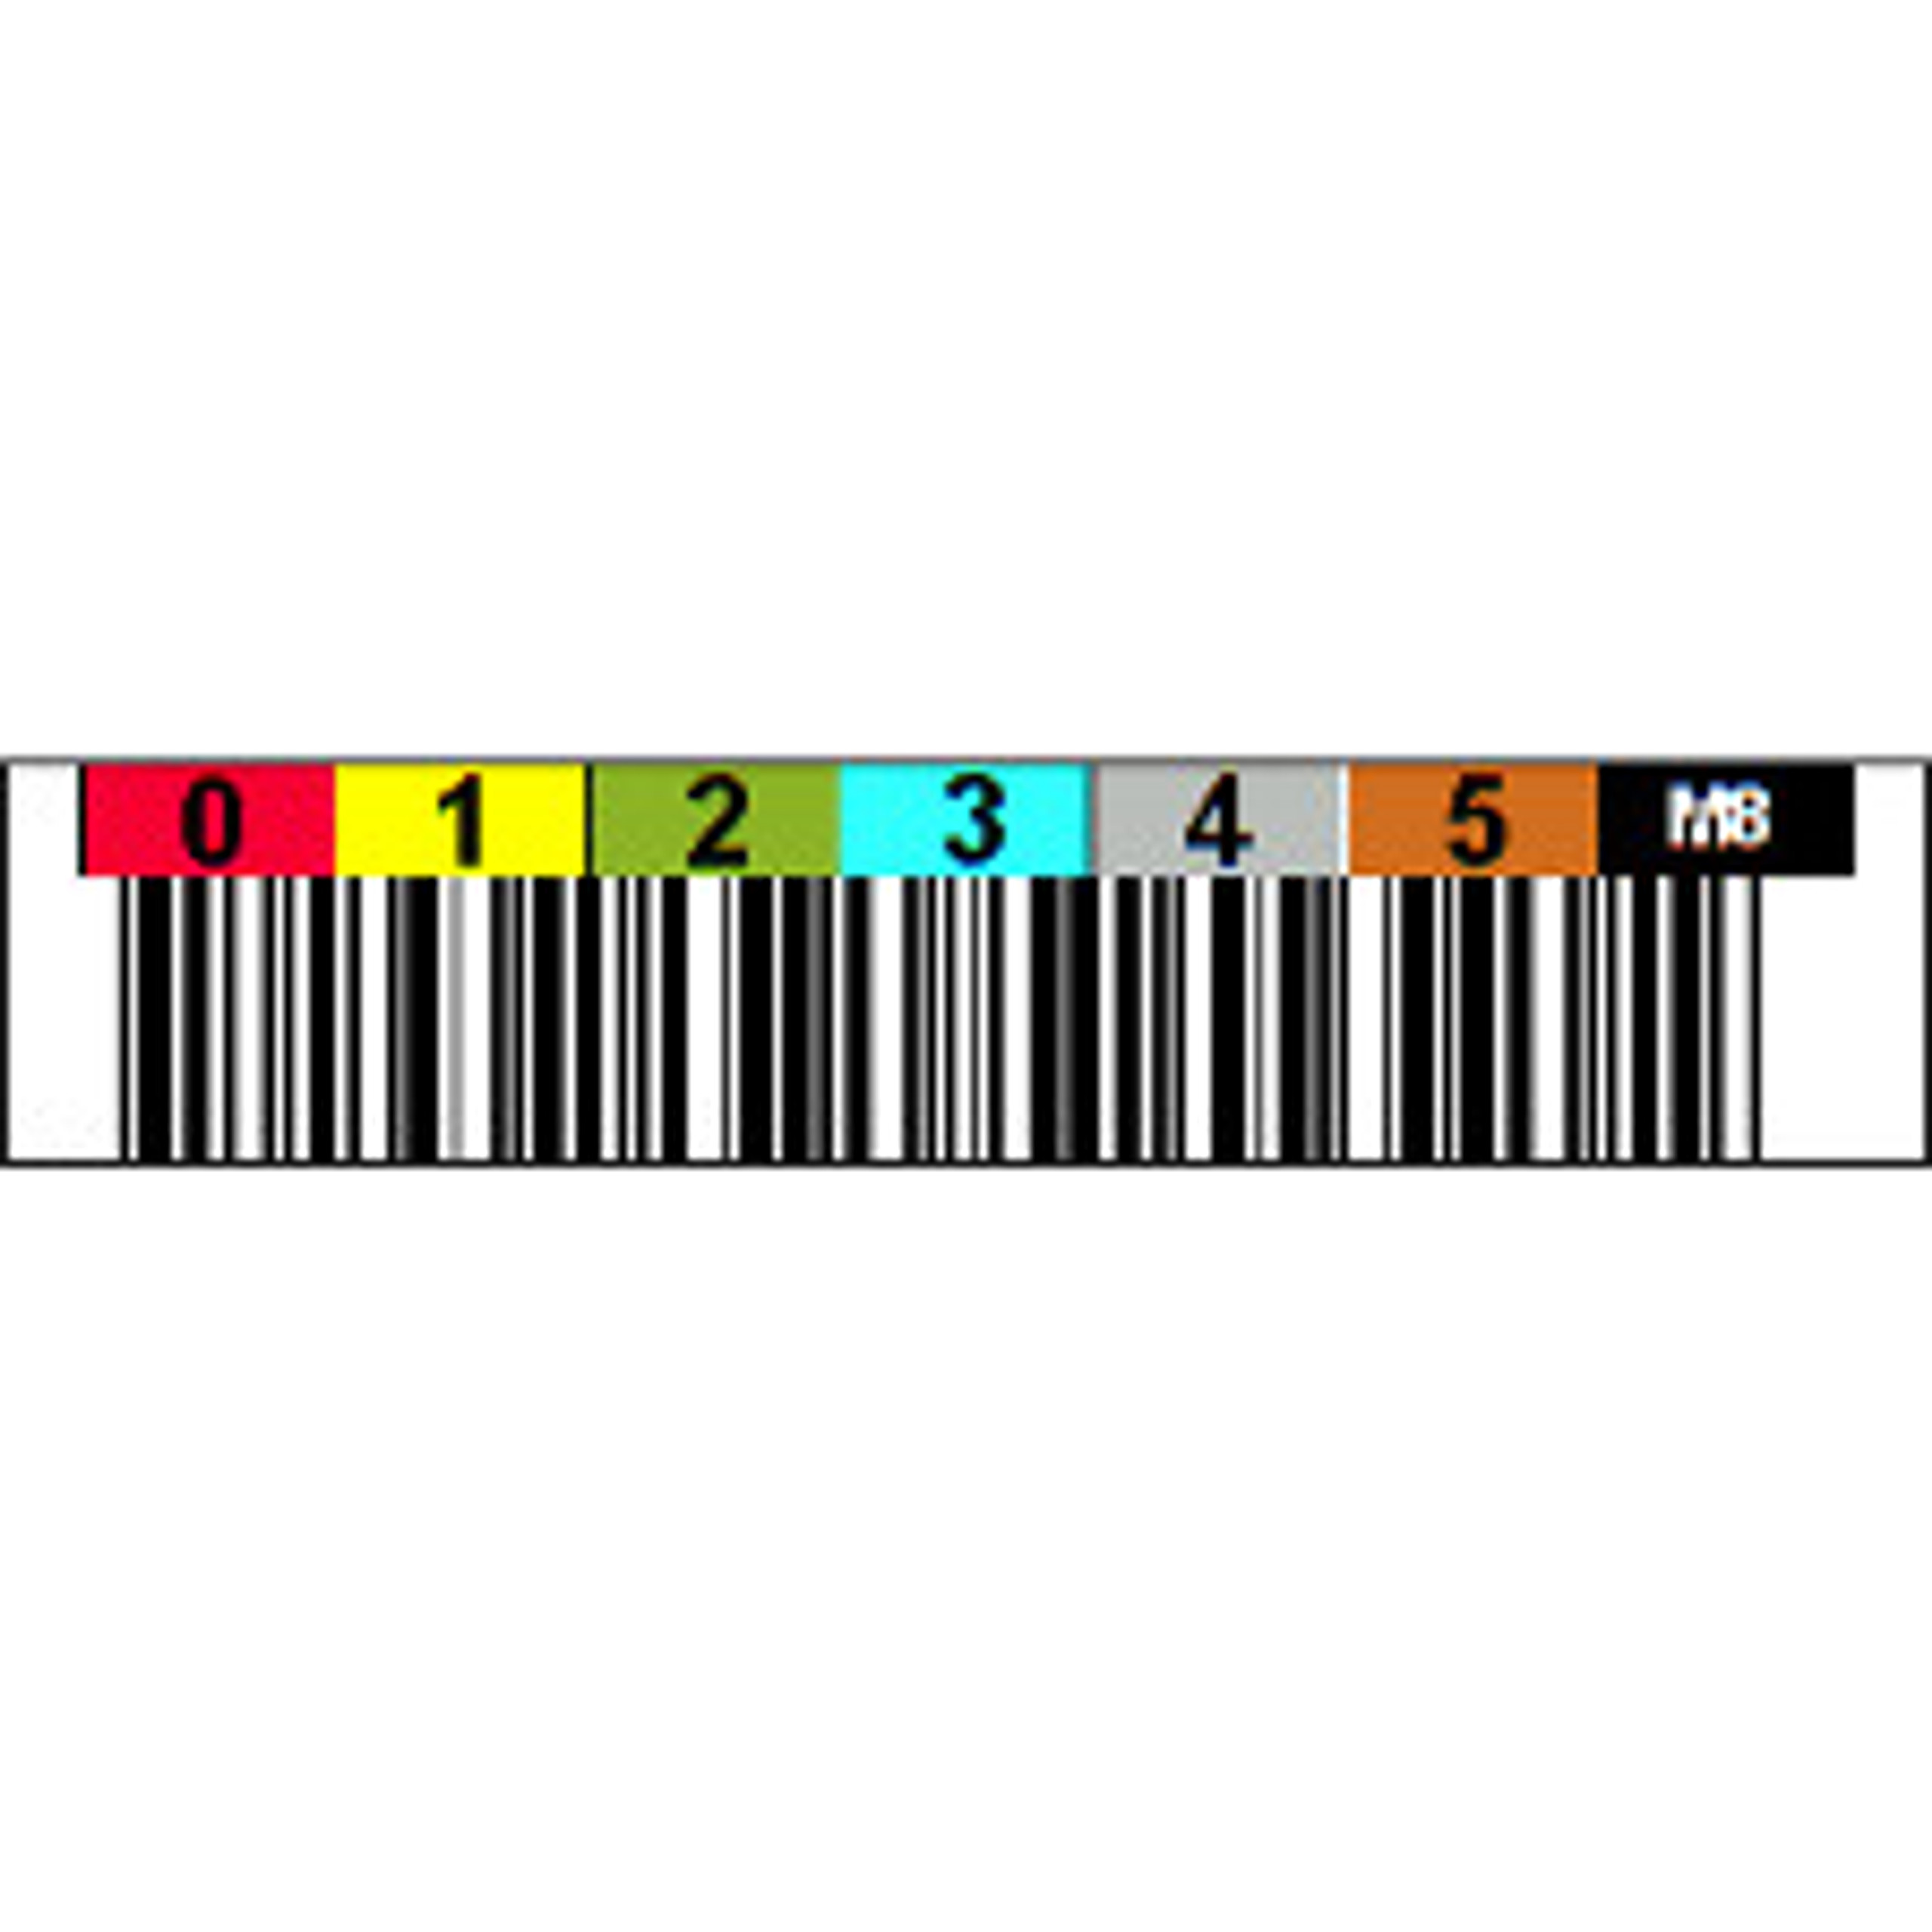 Buy Custom Barcode Labels For Lto Tapes Designed For Your Library Or Autoloader You Can 7754